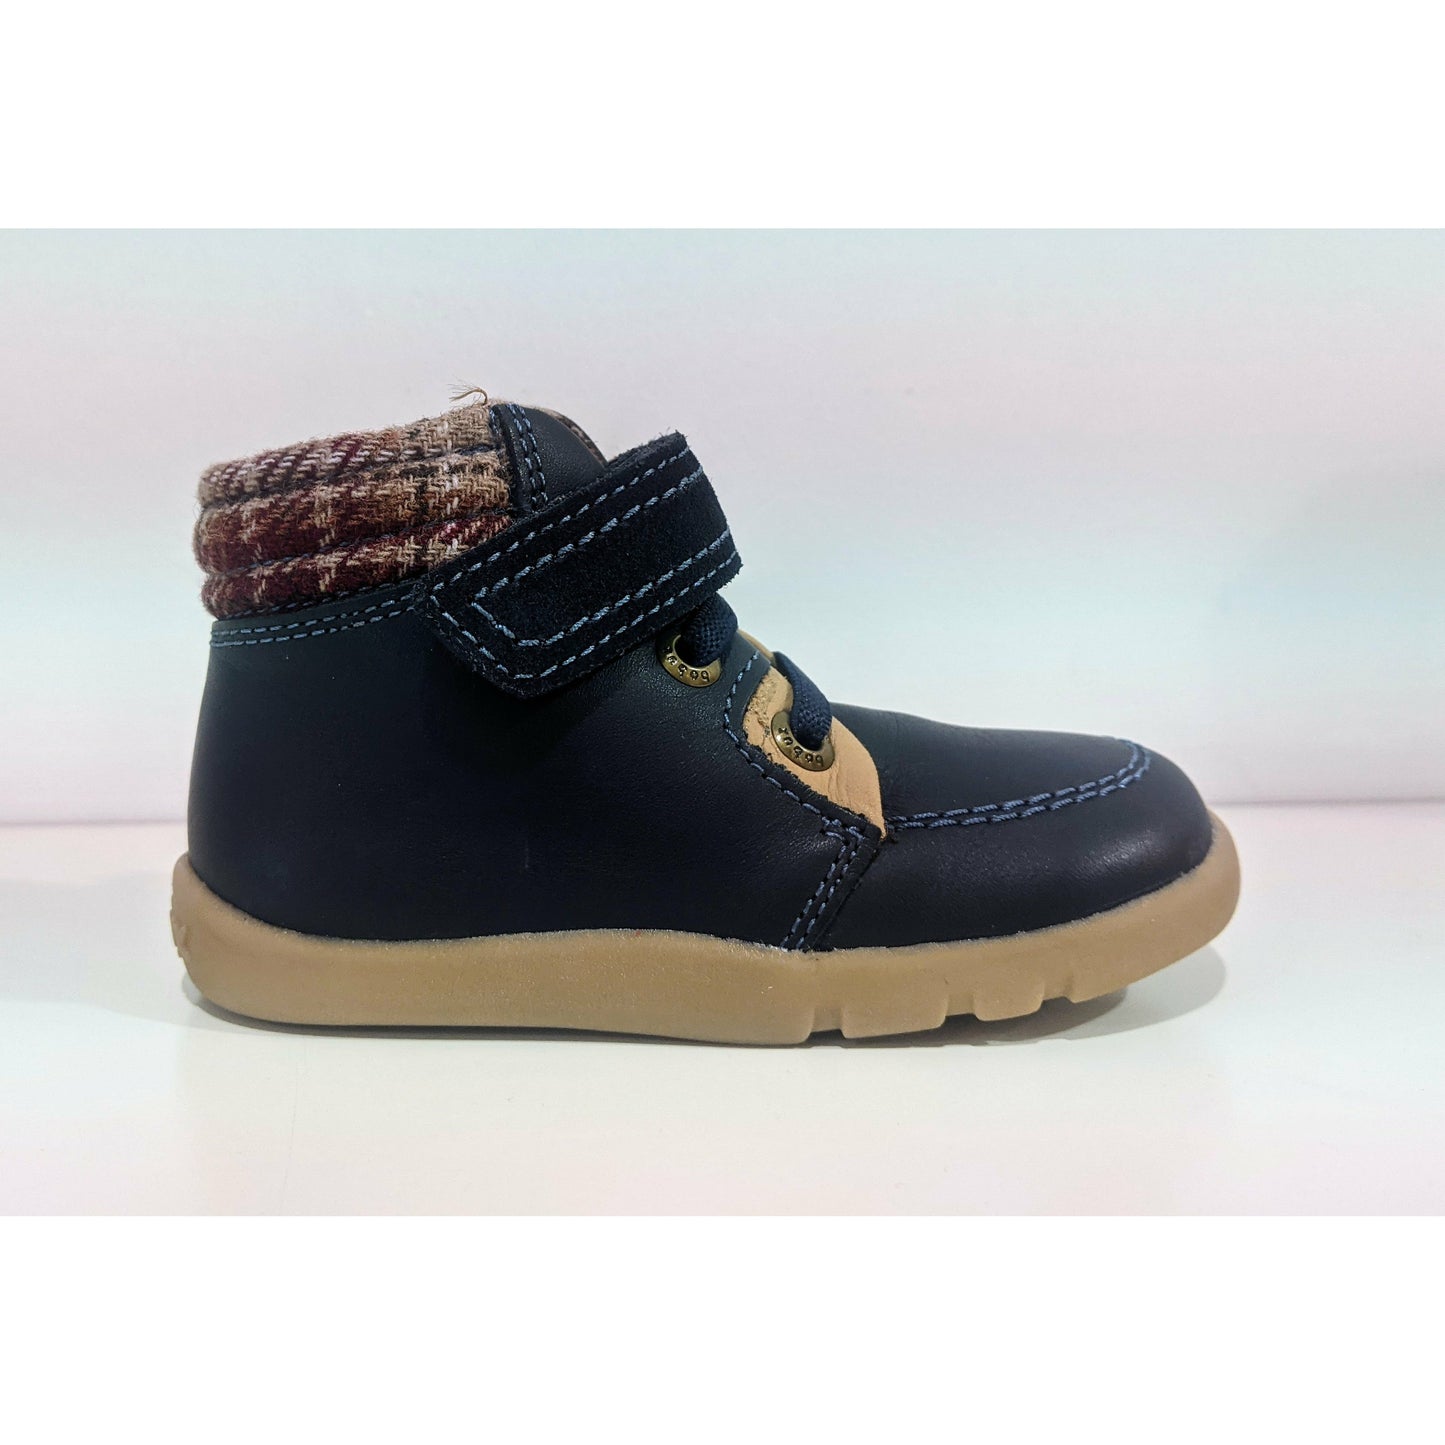 A boys ankle boot by Bobux. style Little Lumberjack, in Navy with velcro fastening. Right side view.